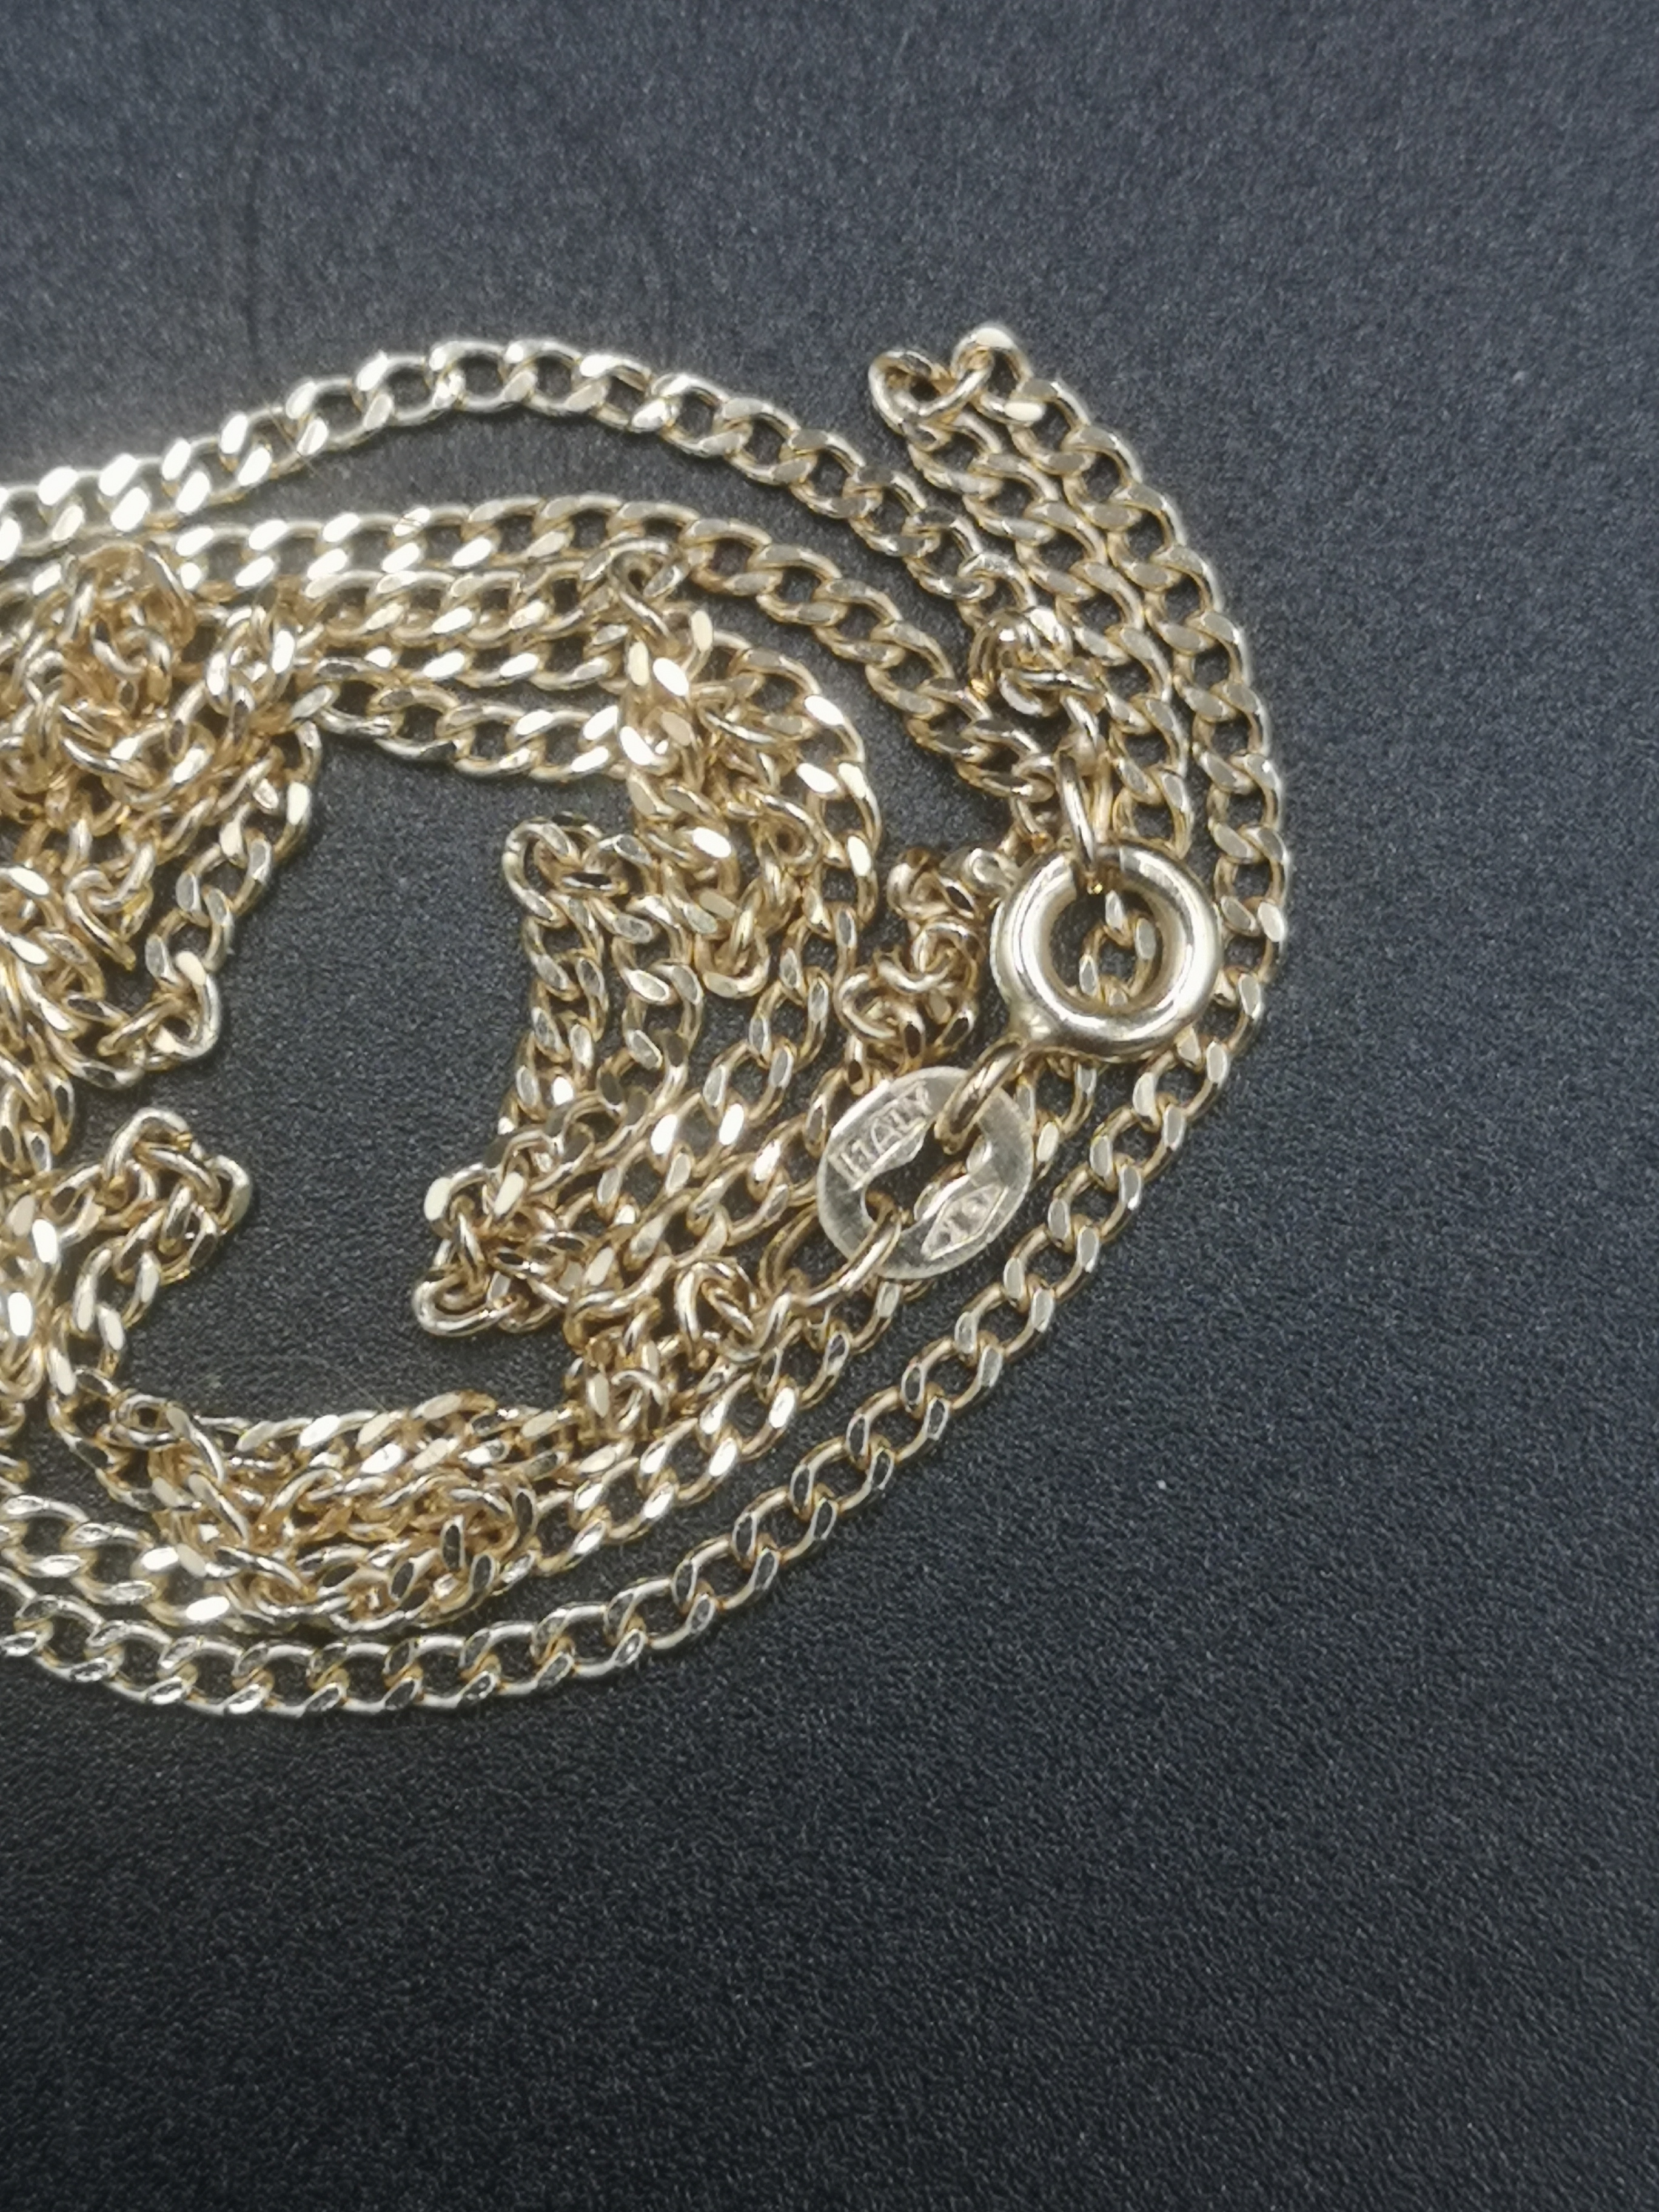 9ct gold chain - Image 4 of 4